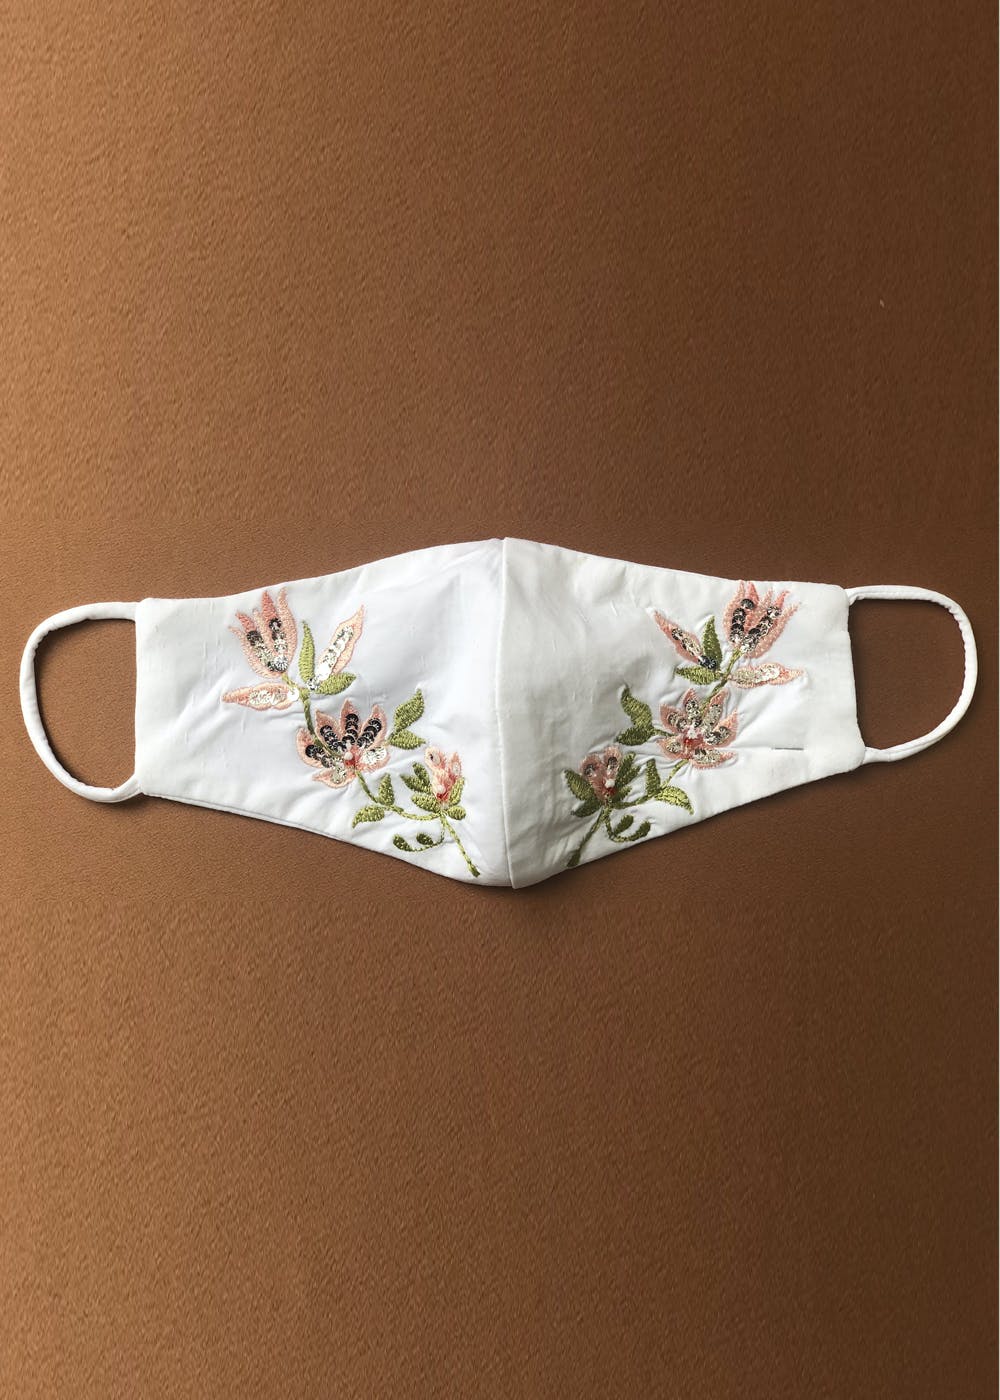 Contrast Floral Embroidered Ivory Face Mask - 3 Ply